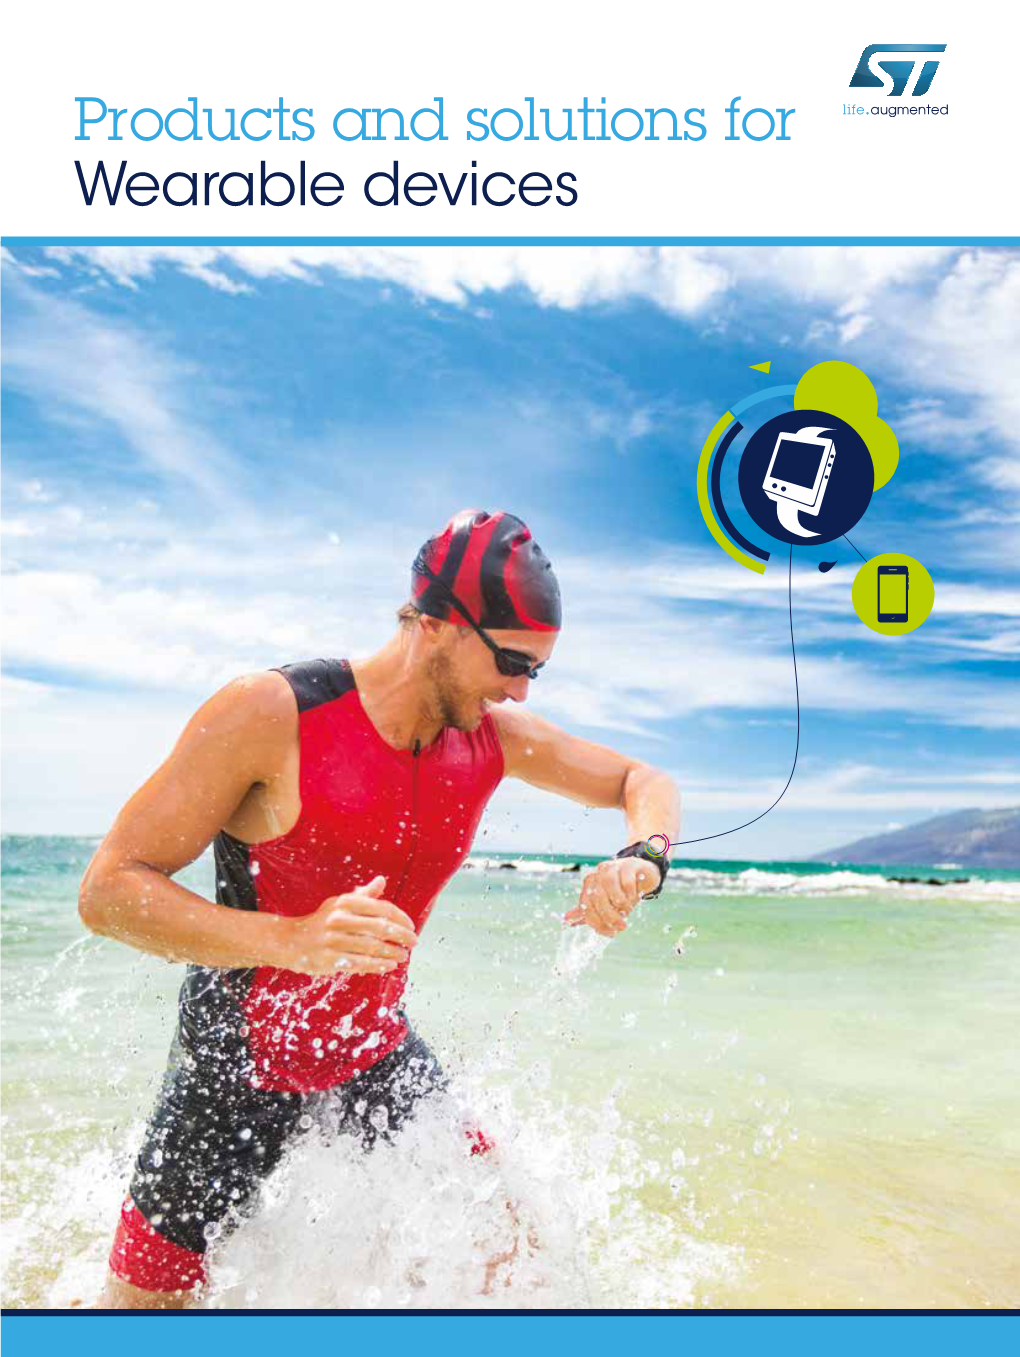 Products and Solutions for Wearable Devices Content